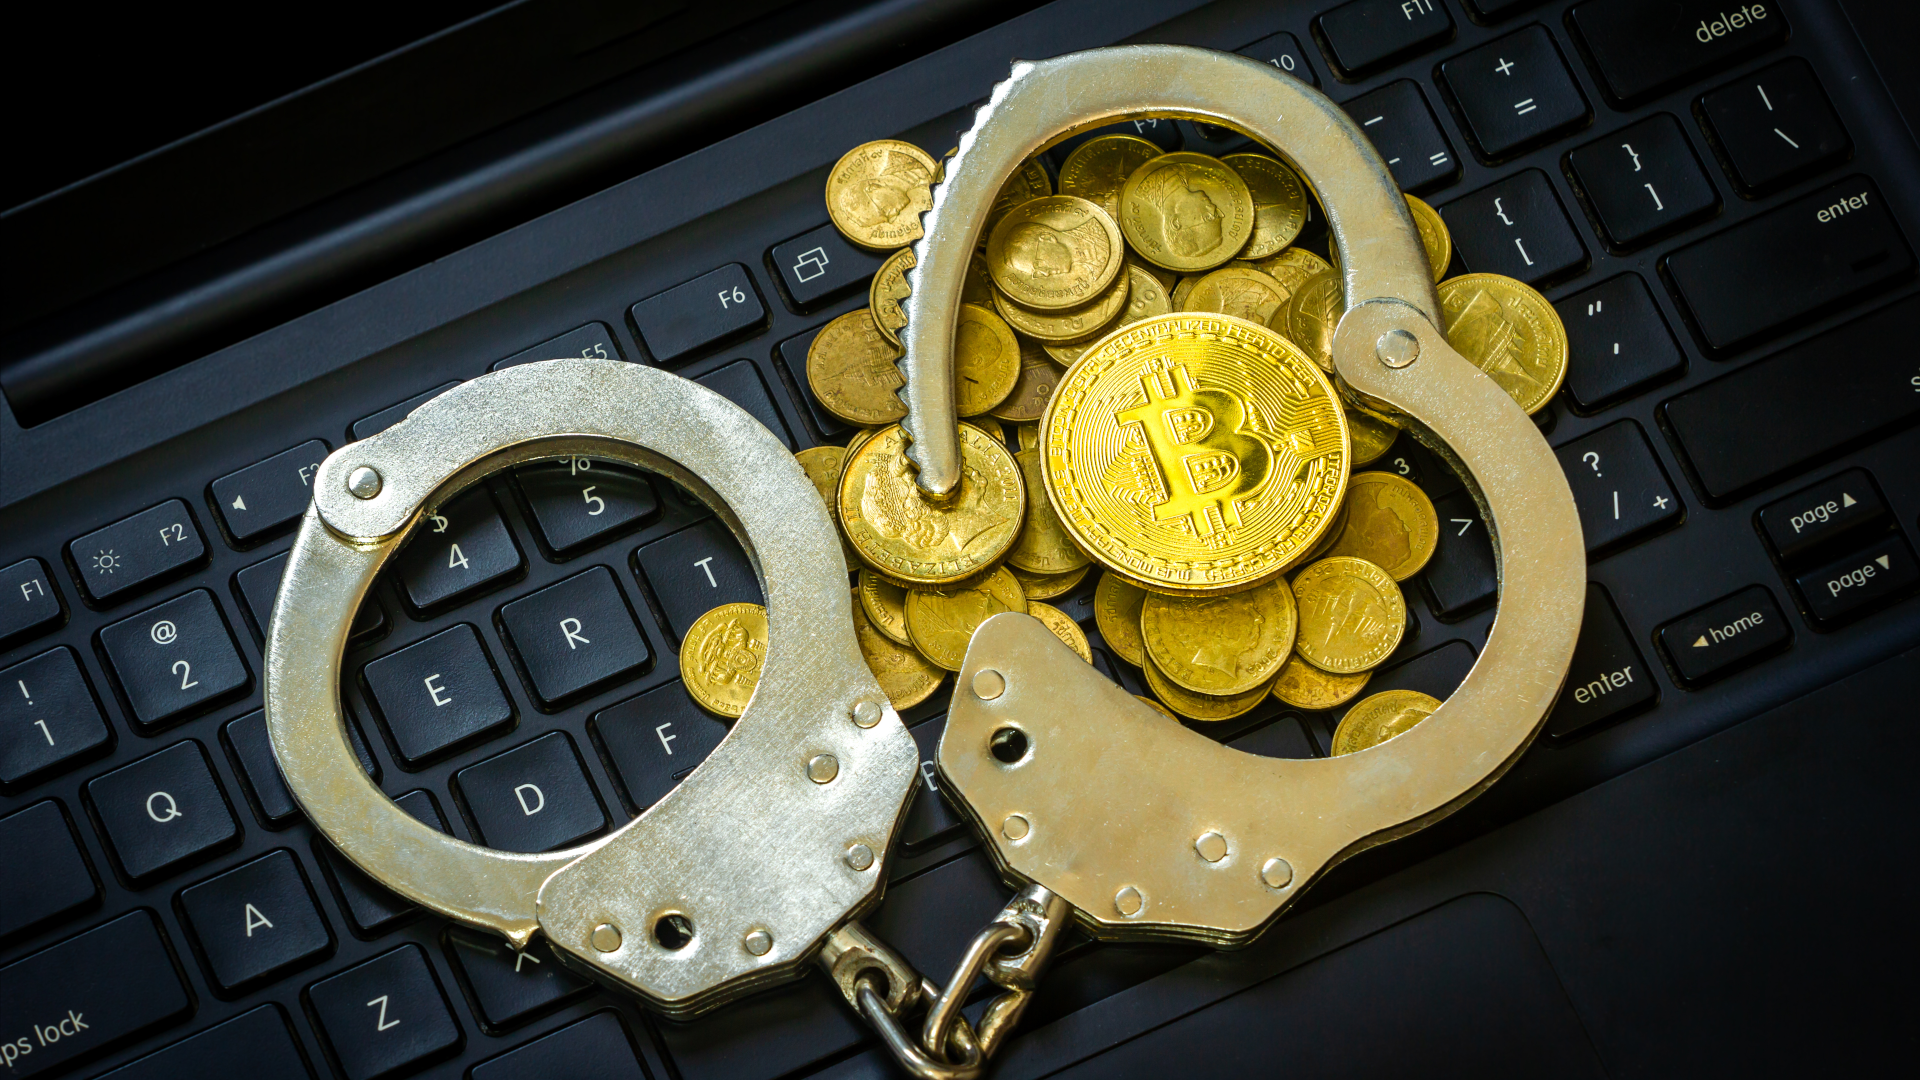 Feds Charge Chinese Nationals in $73 Million 'Pig Butchering' Crypto Scam